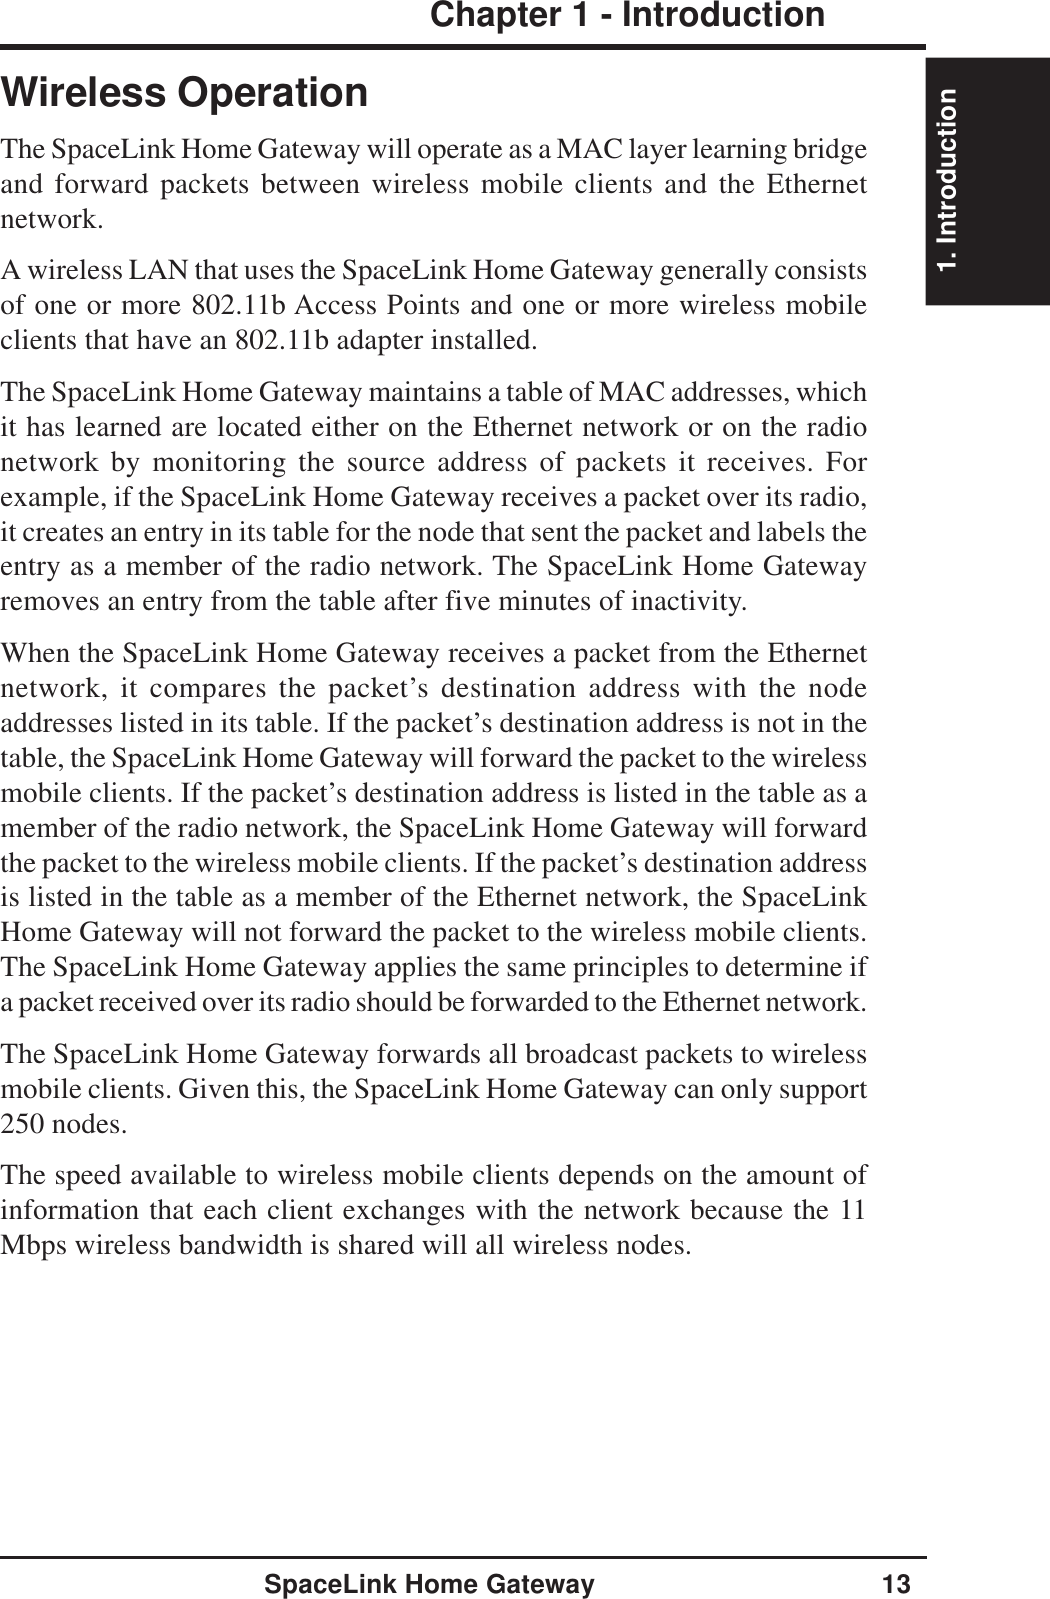 1. IntroductionSpaceLink Home Gateway 13Chapter 1 - IntroductionWireless OperationThe SpaceLink Home Gateway will operate as a MAC layer learning bridgeand forward packets between wireless mobile clients and the Ethernetnetwork.A wireless LAN that uses the SpaceLink Home Gateway generally consistsof one or more 802.11b Access Points and one or more wireless mobileclients that have an 802.11b adapter installed.The SpaceLink Home Gateway maintains a table of MAC addresses, whichit has learned are located either on the Ethernet network or on the radionetwork by monitoring the source address of packets it receives. Forexample, if the SpaceLink Home Gateway receives a packet over its radio,it creates an entry in its table for the node that sent the packet and labels theentry as a member of the radio network. The SpaceLink Home Gatewayremoves an entry from the table after five minutes of inactivity.When the SpaceLink Home Gateway receives a packet from the Ethernetnetwork, it compares the packet’s destination address with the nodeaddresses listed in its table. If the packet’s destination address is not in thetable, the SpaceLink Home Gateway will forward the packet to the wirelessmobile clients. If the packet’s destination address is listed in the table as amember of the radio network, the SpaceLink Home Gateway will forwardthe packet to the wireless mobile clients. If the packet’s destination addressis listed in the table as a member of the Ethernet network, the SpaceLinkHome Gateway will not forward the packet to the wireless mobile clients.The SpaceLink Home Gateway applies the same principles to determine ifa packet received over its radio should be forwarded to the Ethernet network.The SpaceLink Home Gateway forwards all broadcast packets to wirelessmobile clients. Given this, the SpaceLink Home Gateway can only support250 nodes.The speed available to wireless mobile clients depends on the amount ofinformation that each client exchanges with the network because the 11Mbps wireless bandwidth is shared will all wireless nodes.